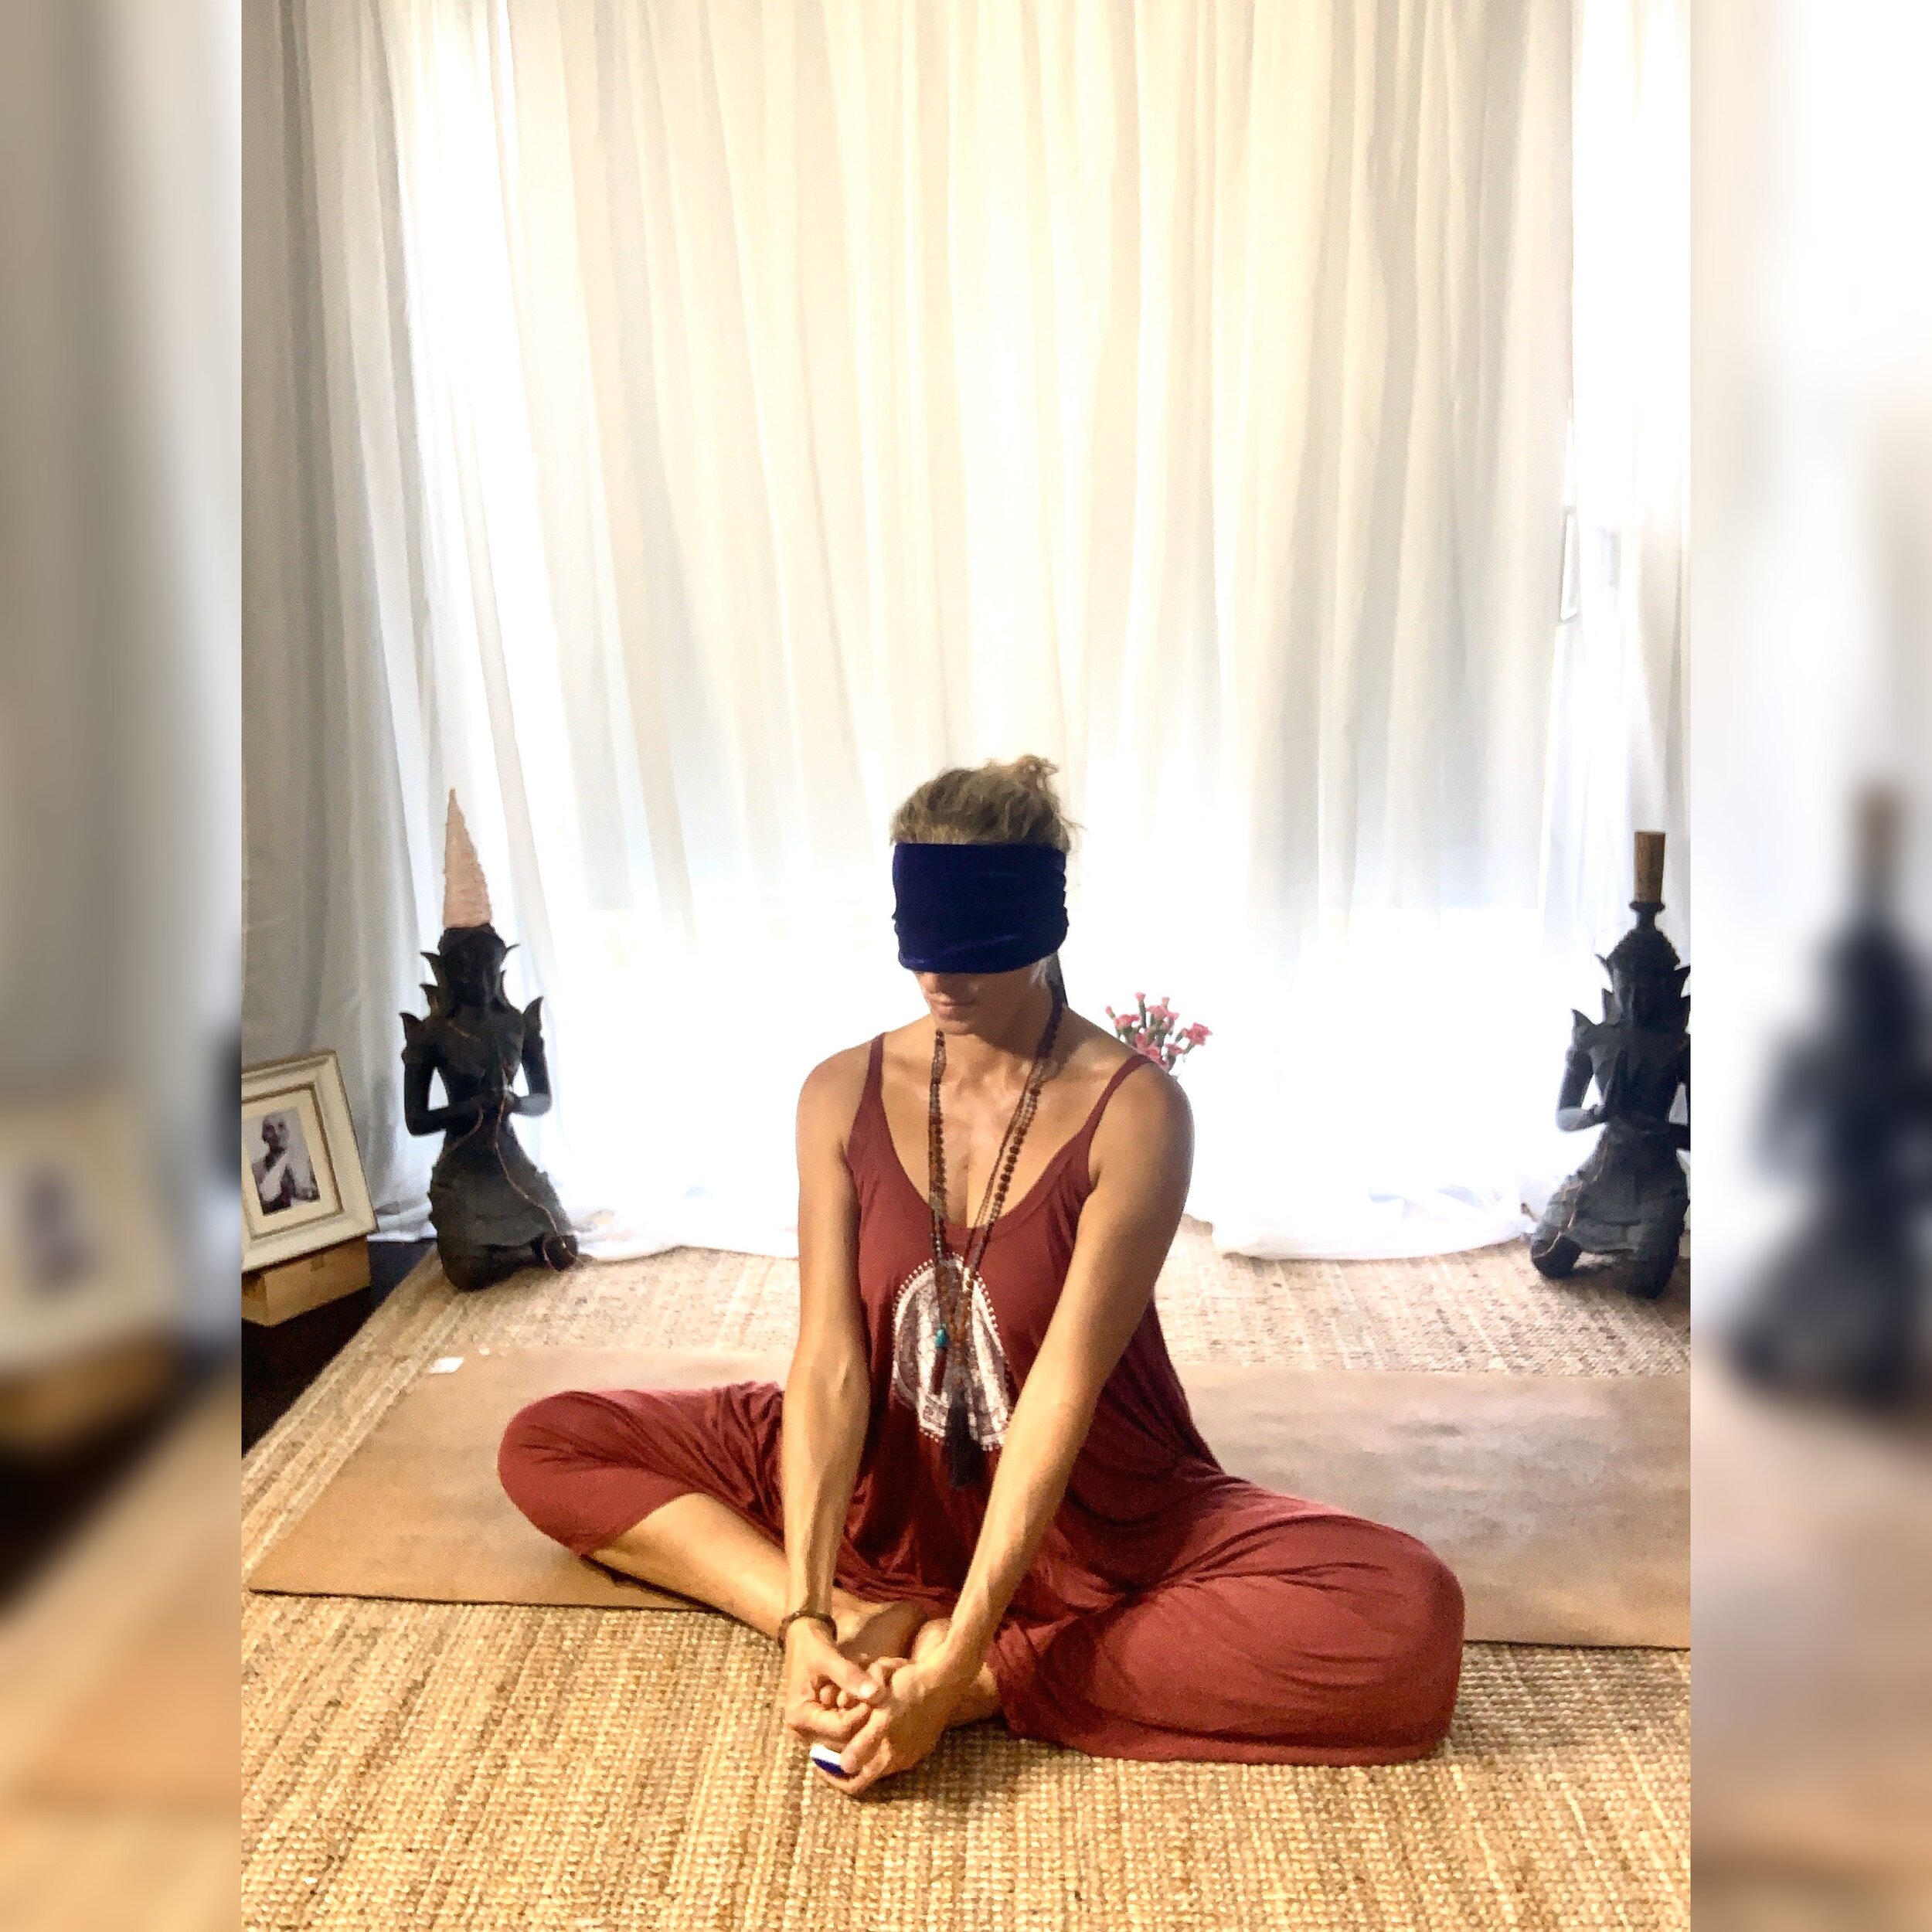 What is Blindfolded Yoga?